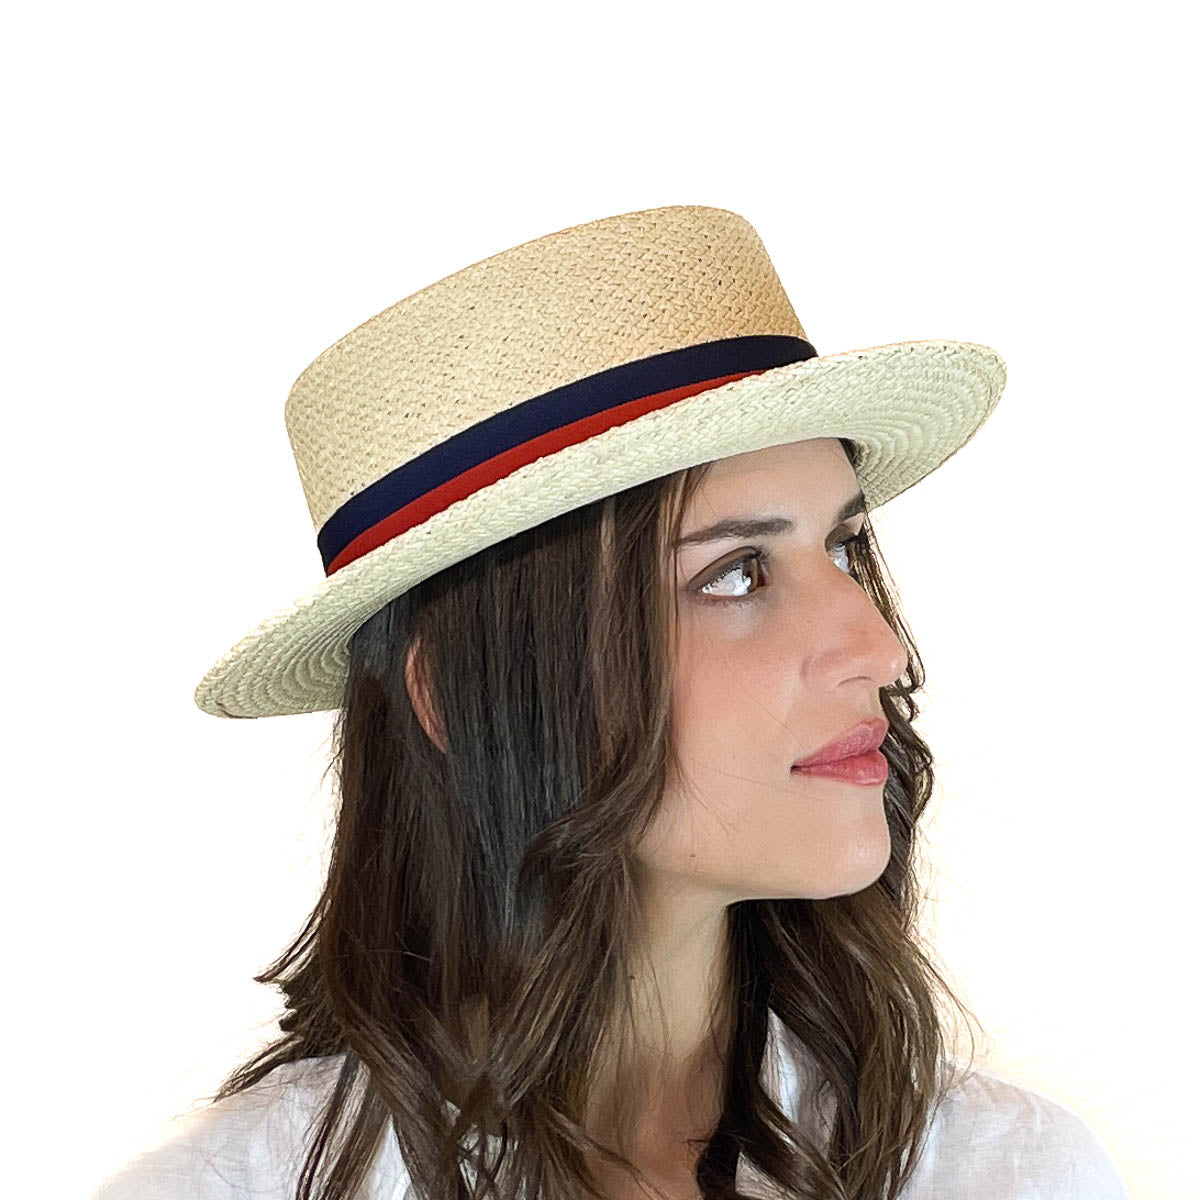 The Boater | Panama Hat